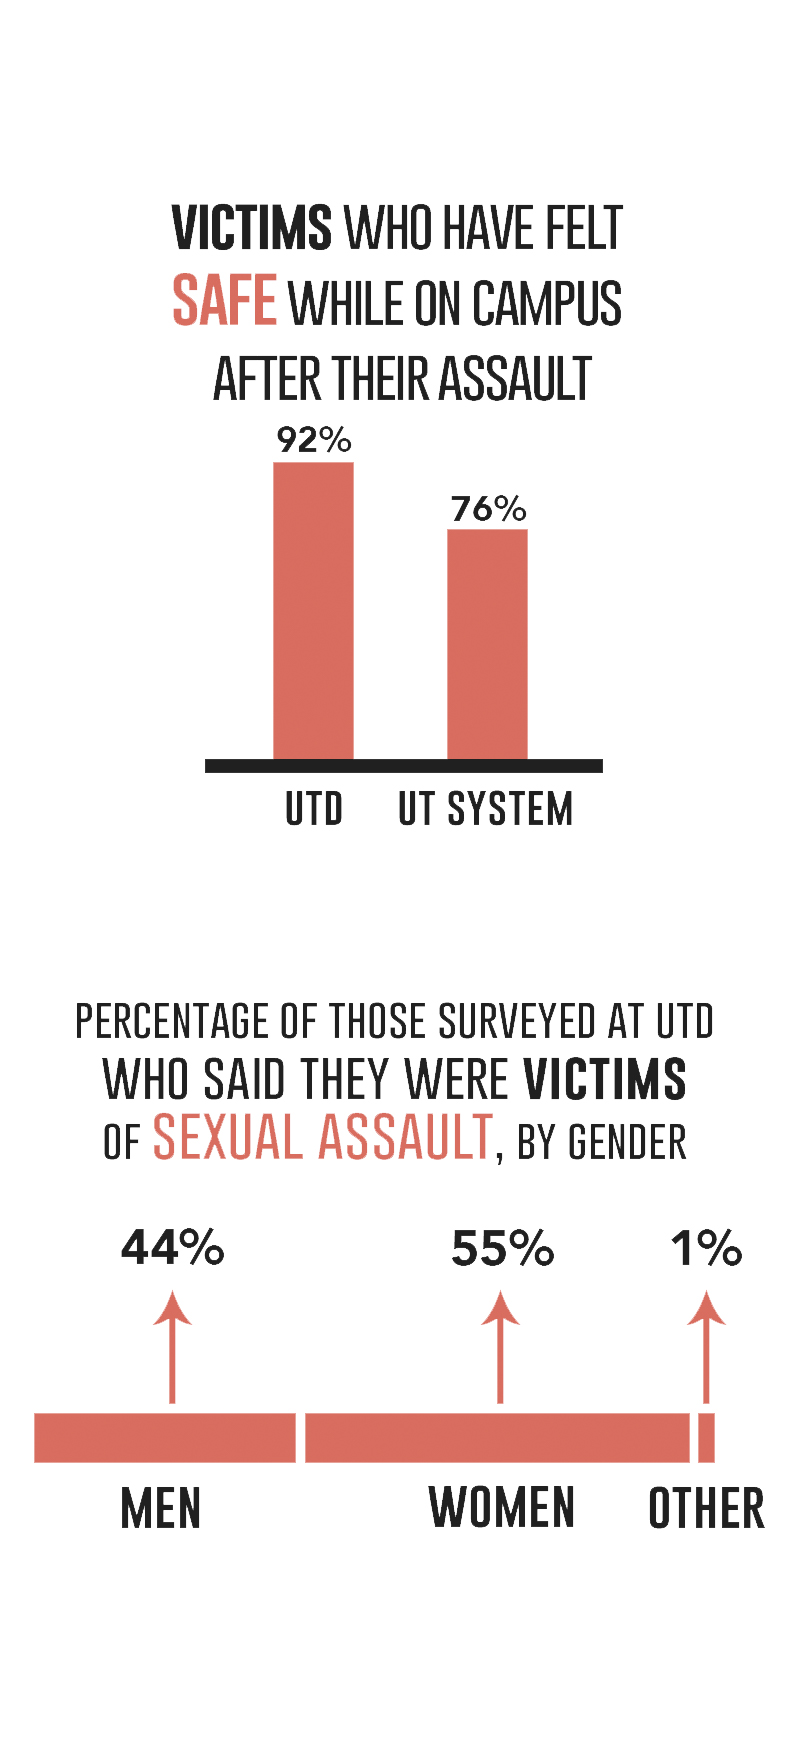 UTD is implementing solutions, spreading awareness of resources for sexual assault